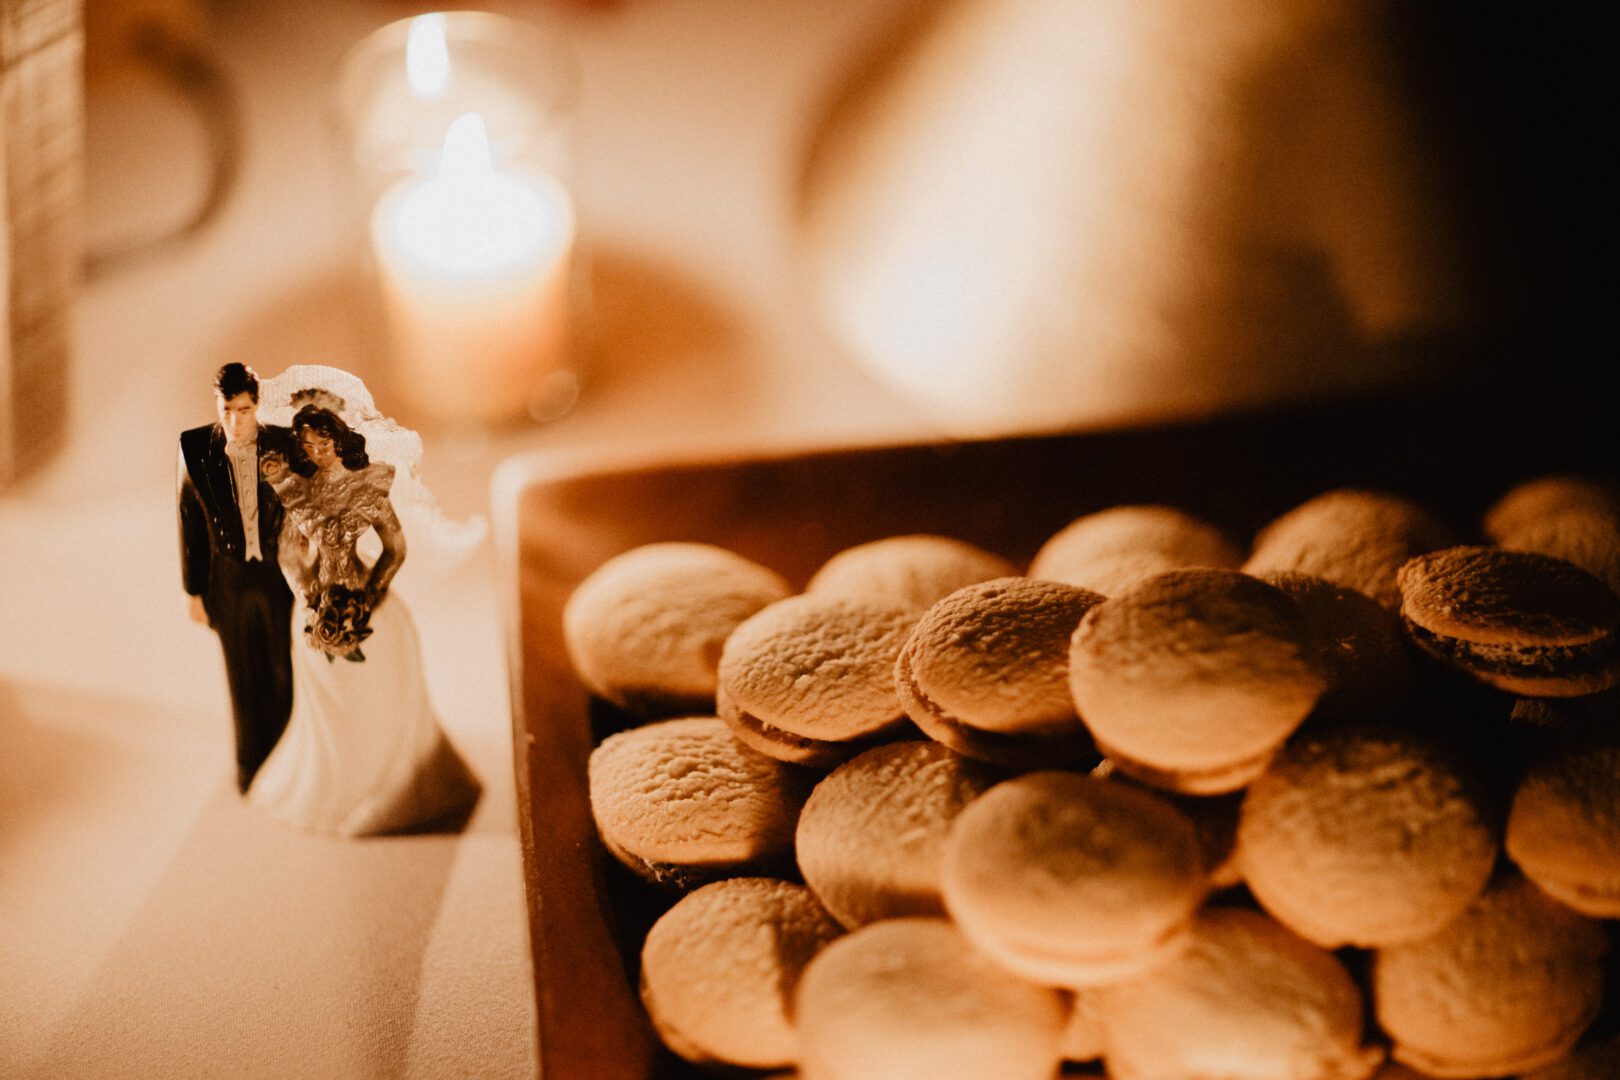 Macaroons and a figurine of a bride and groom in front of a candle.